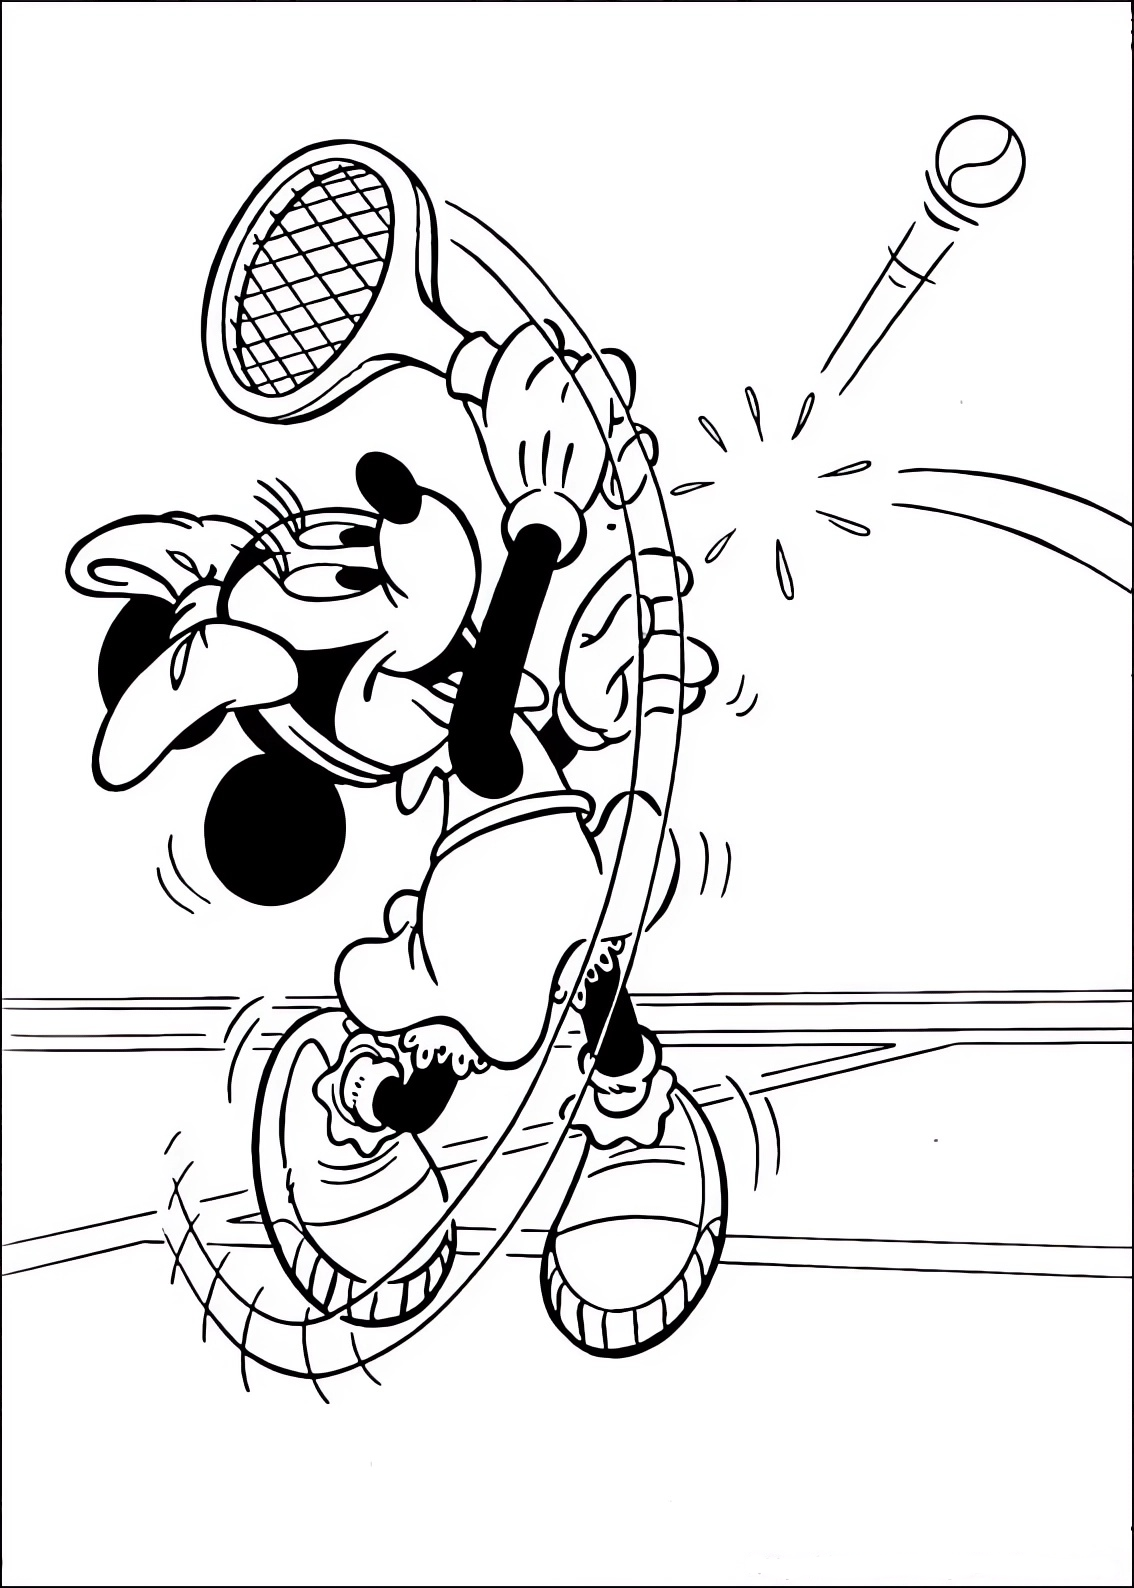 Coloring page of Minnie Mouse playing tennis